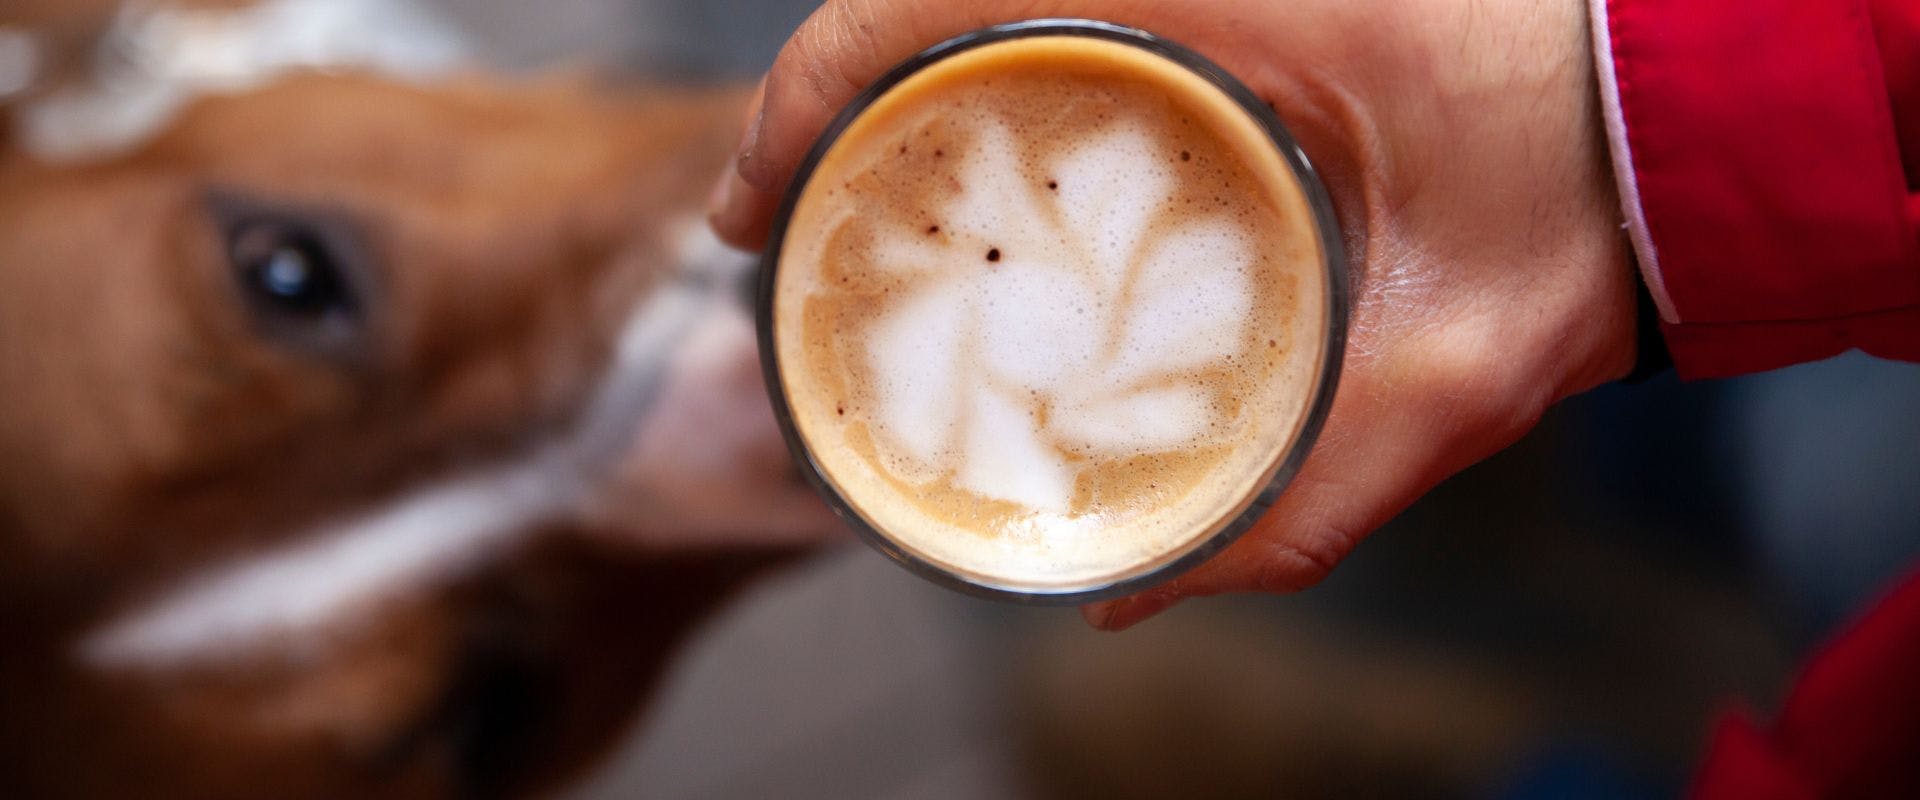 Close-up of latte with a dog in the background